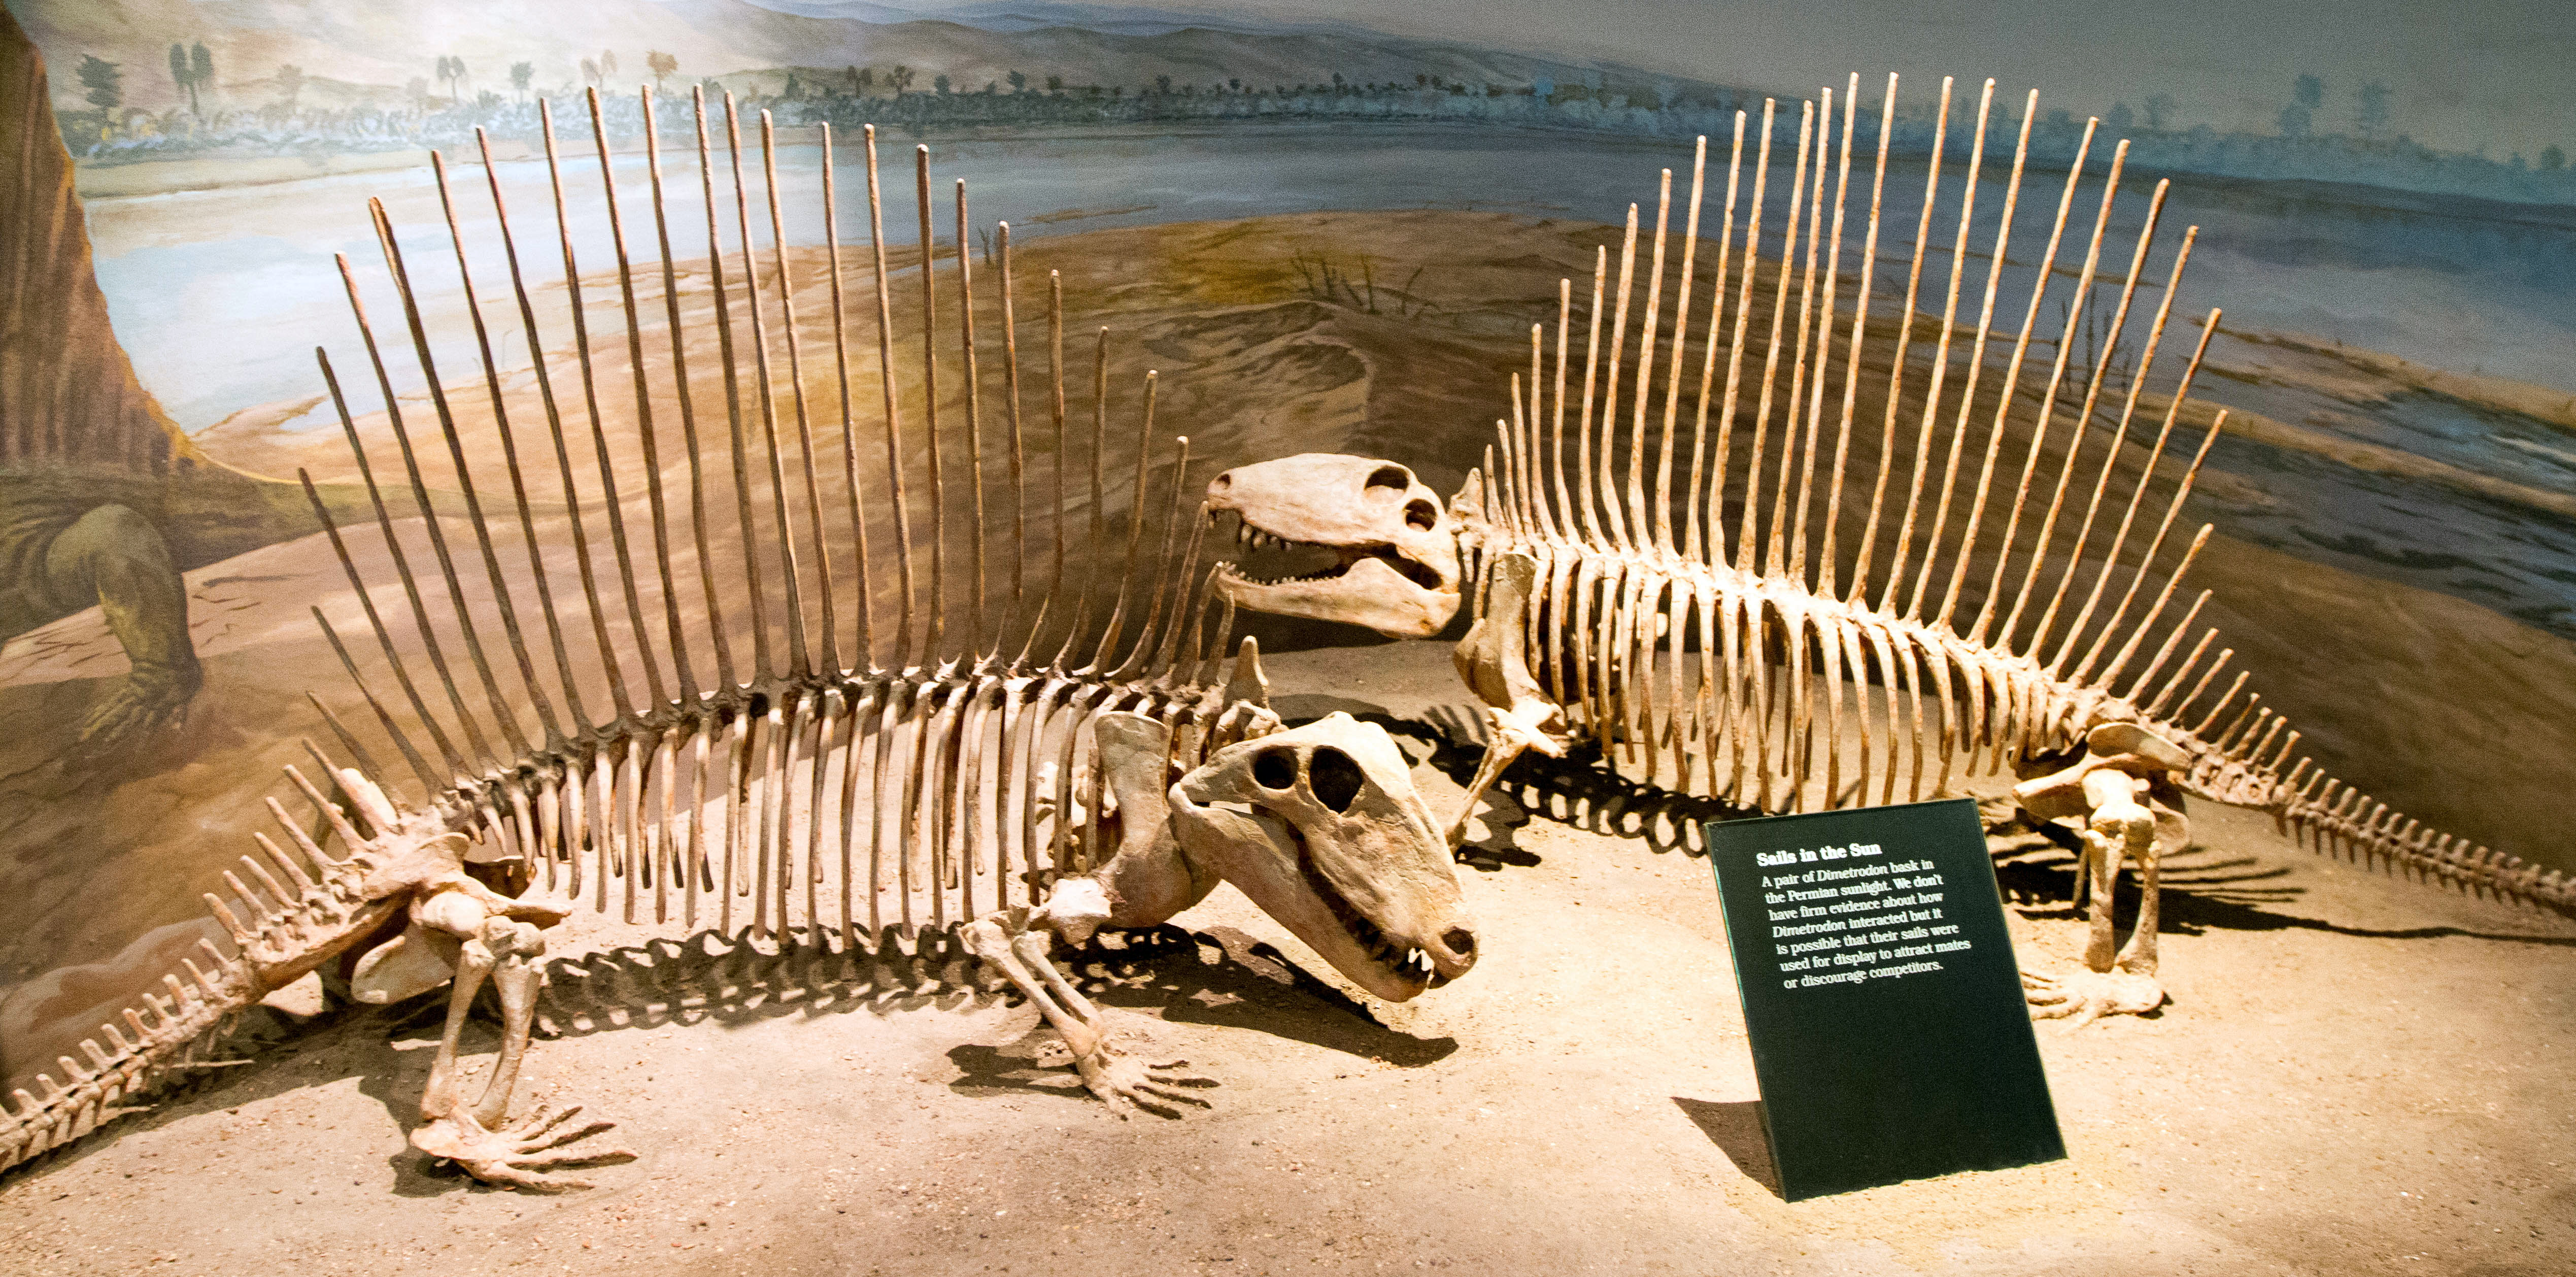 Fossil replicas of dimetrodon sp., predating the era when mammals appeared, on display in a museum exhibit, showcasing their distinctive sail-like spines.